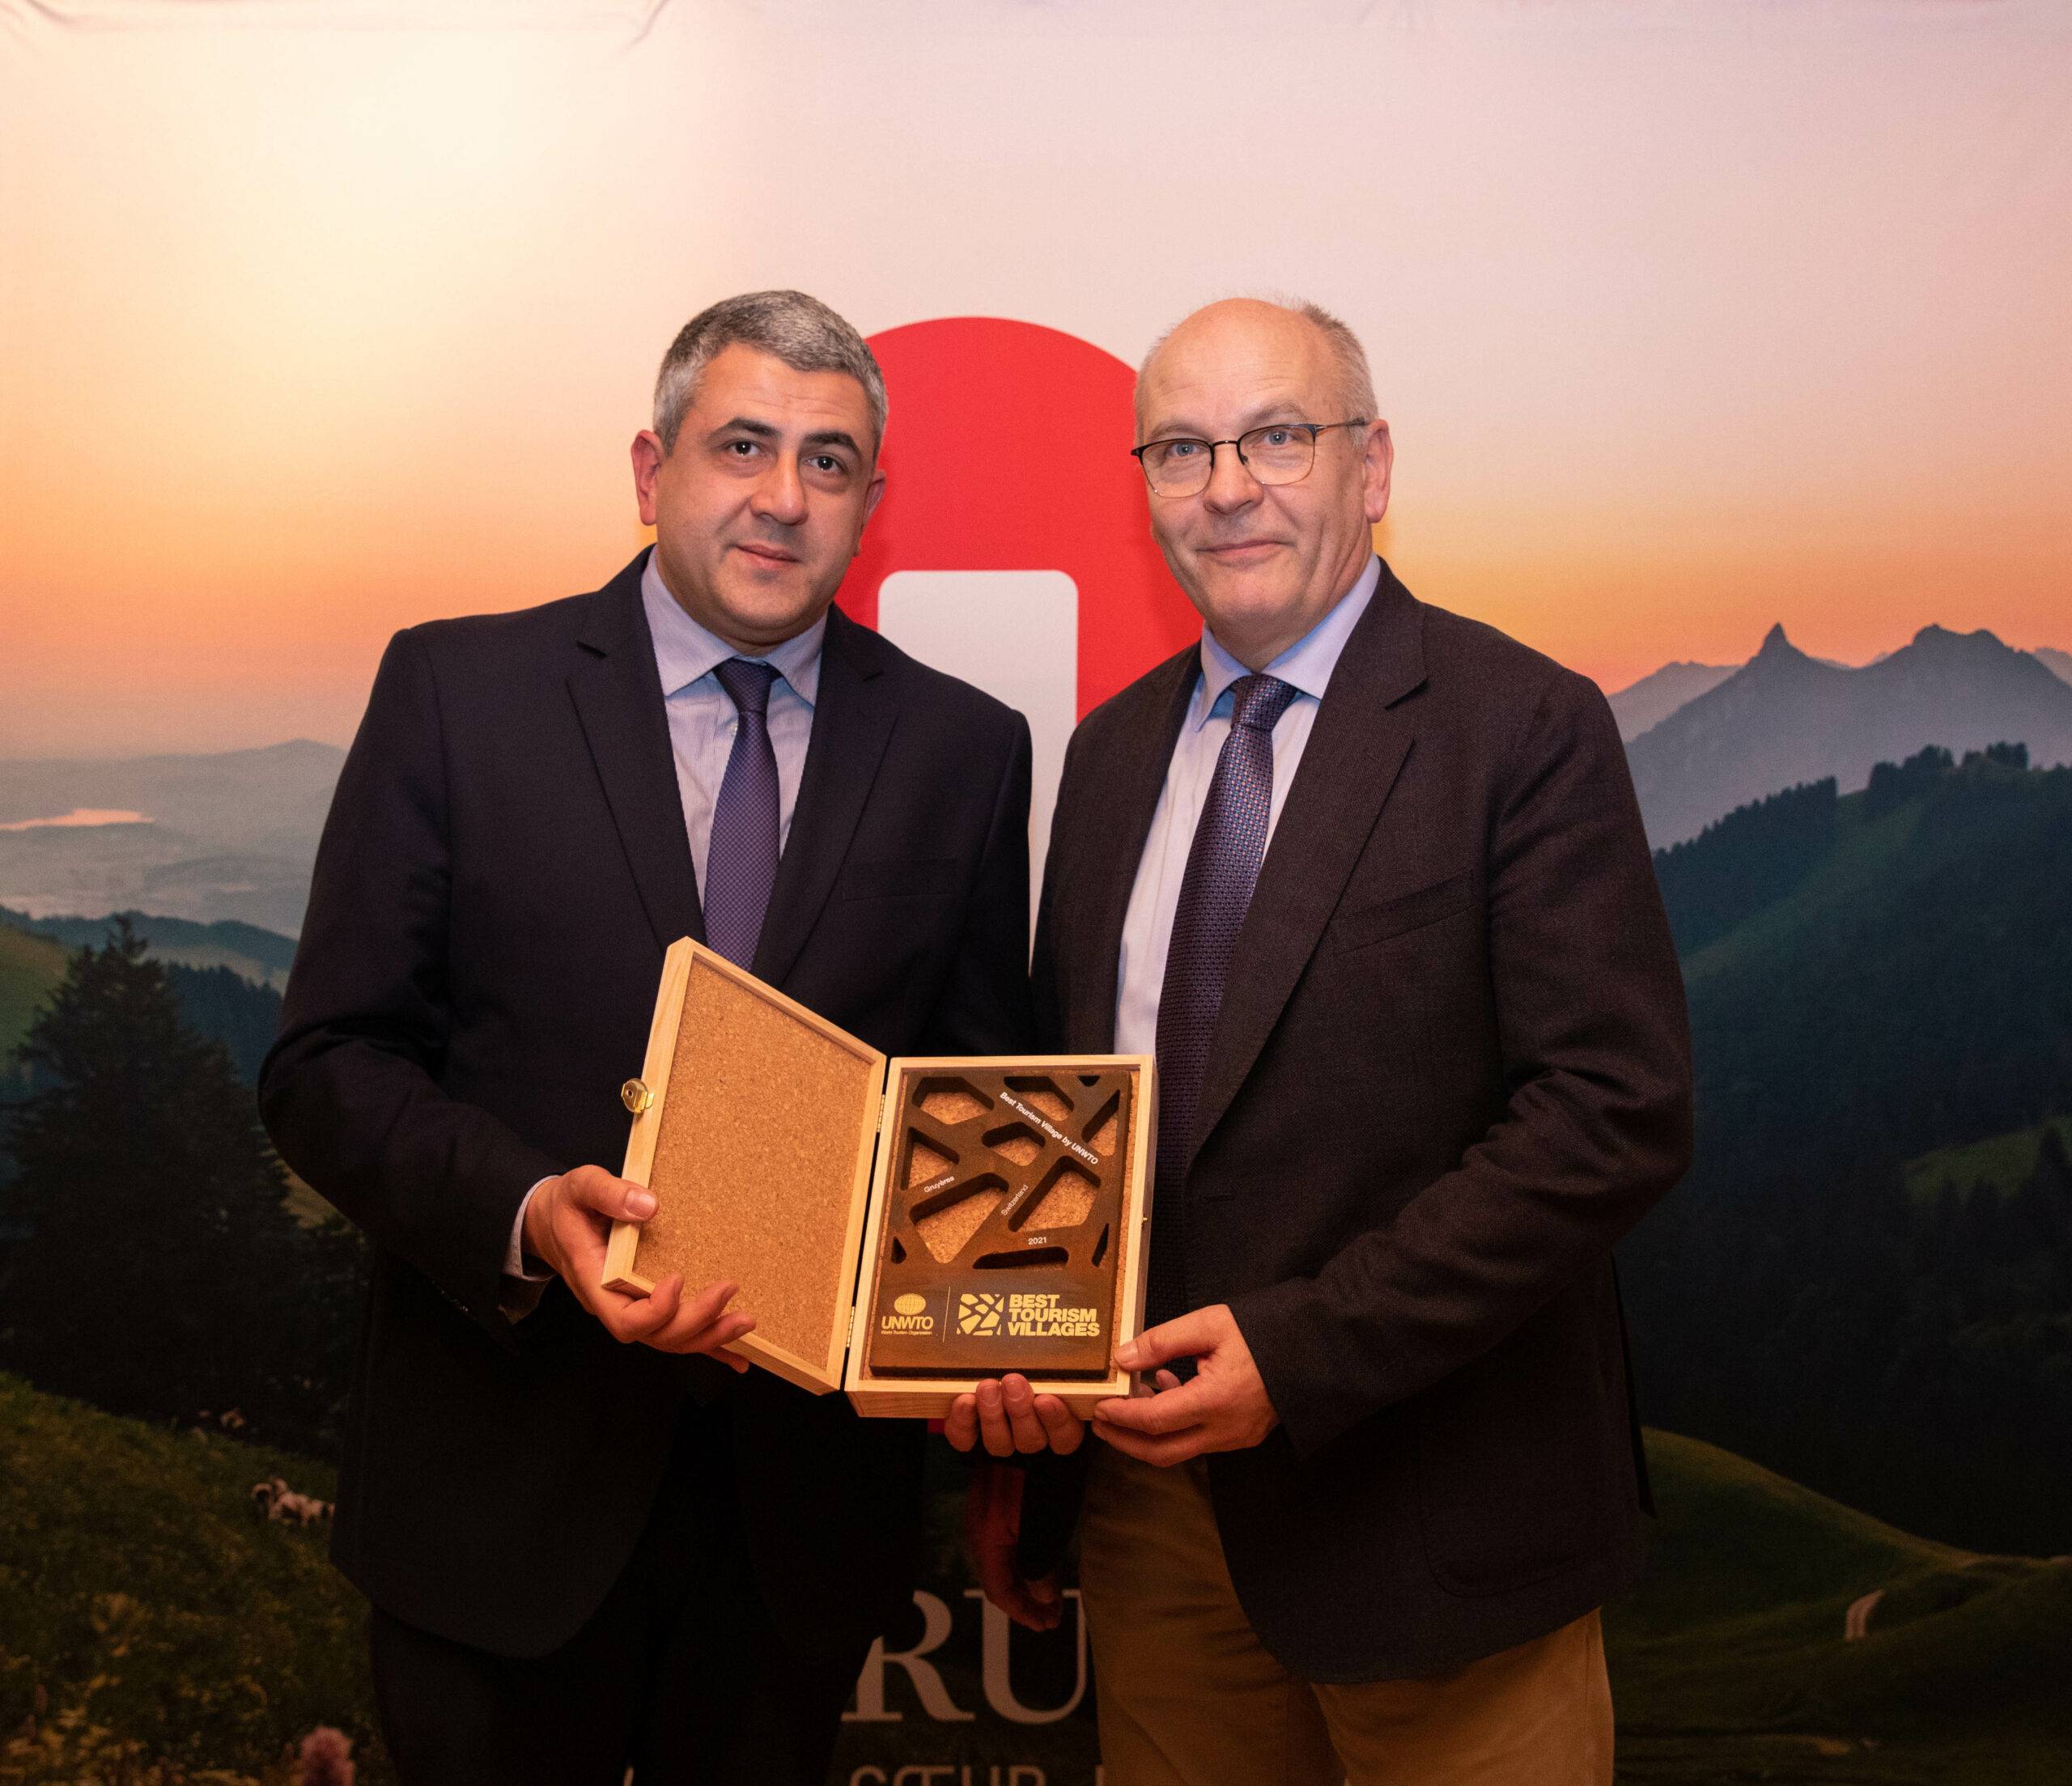 The Secretary-General visits Gruyères, one of the Best Tourism Villages 2021